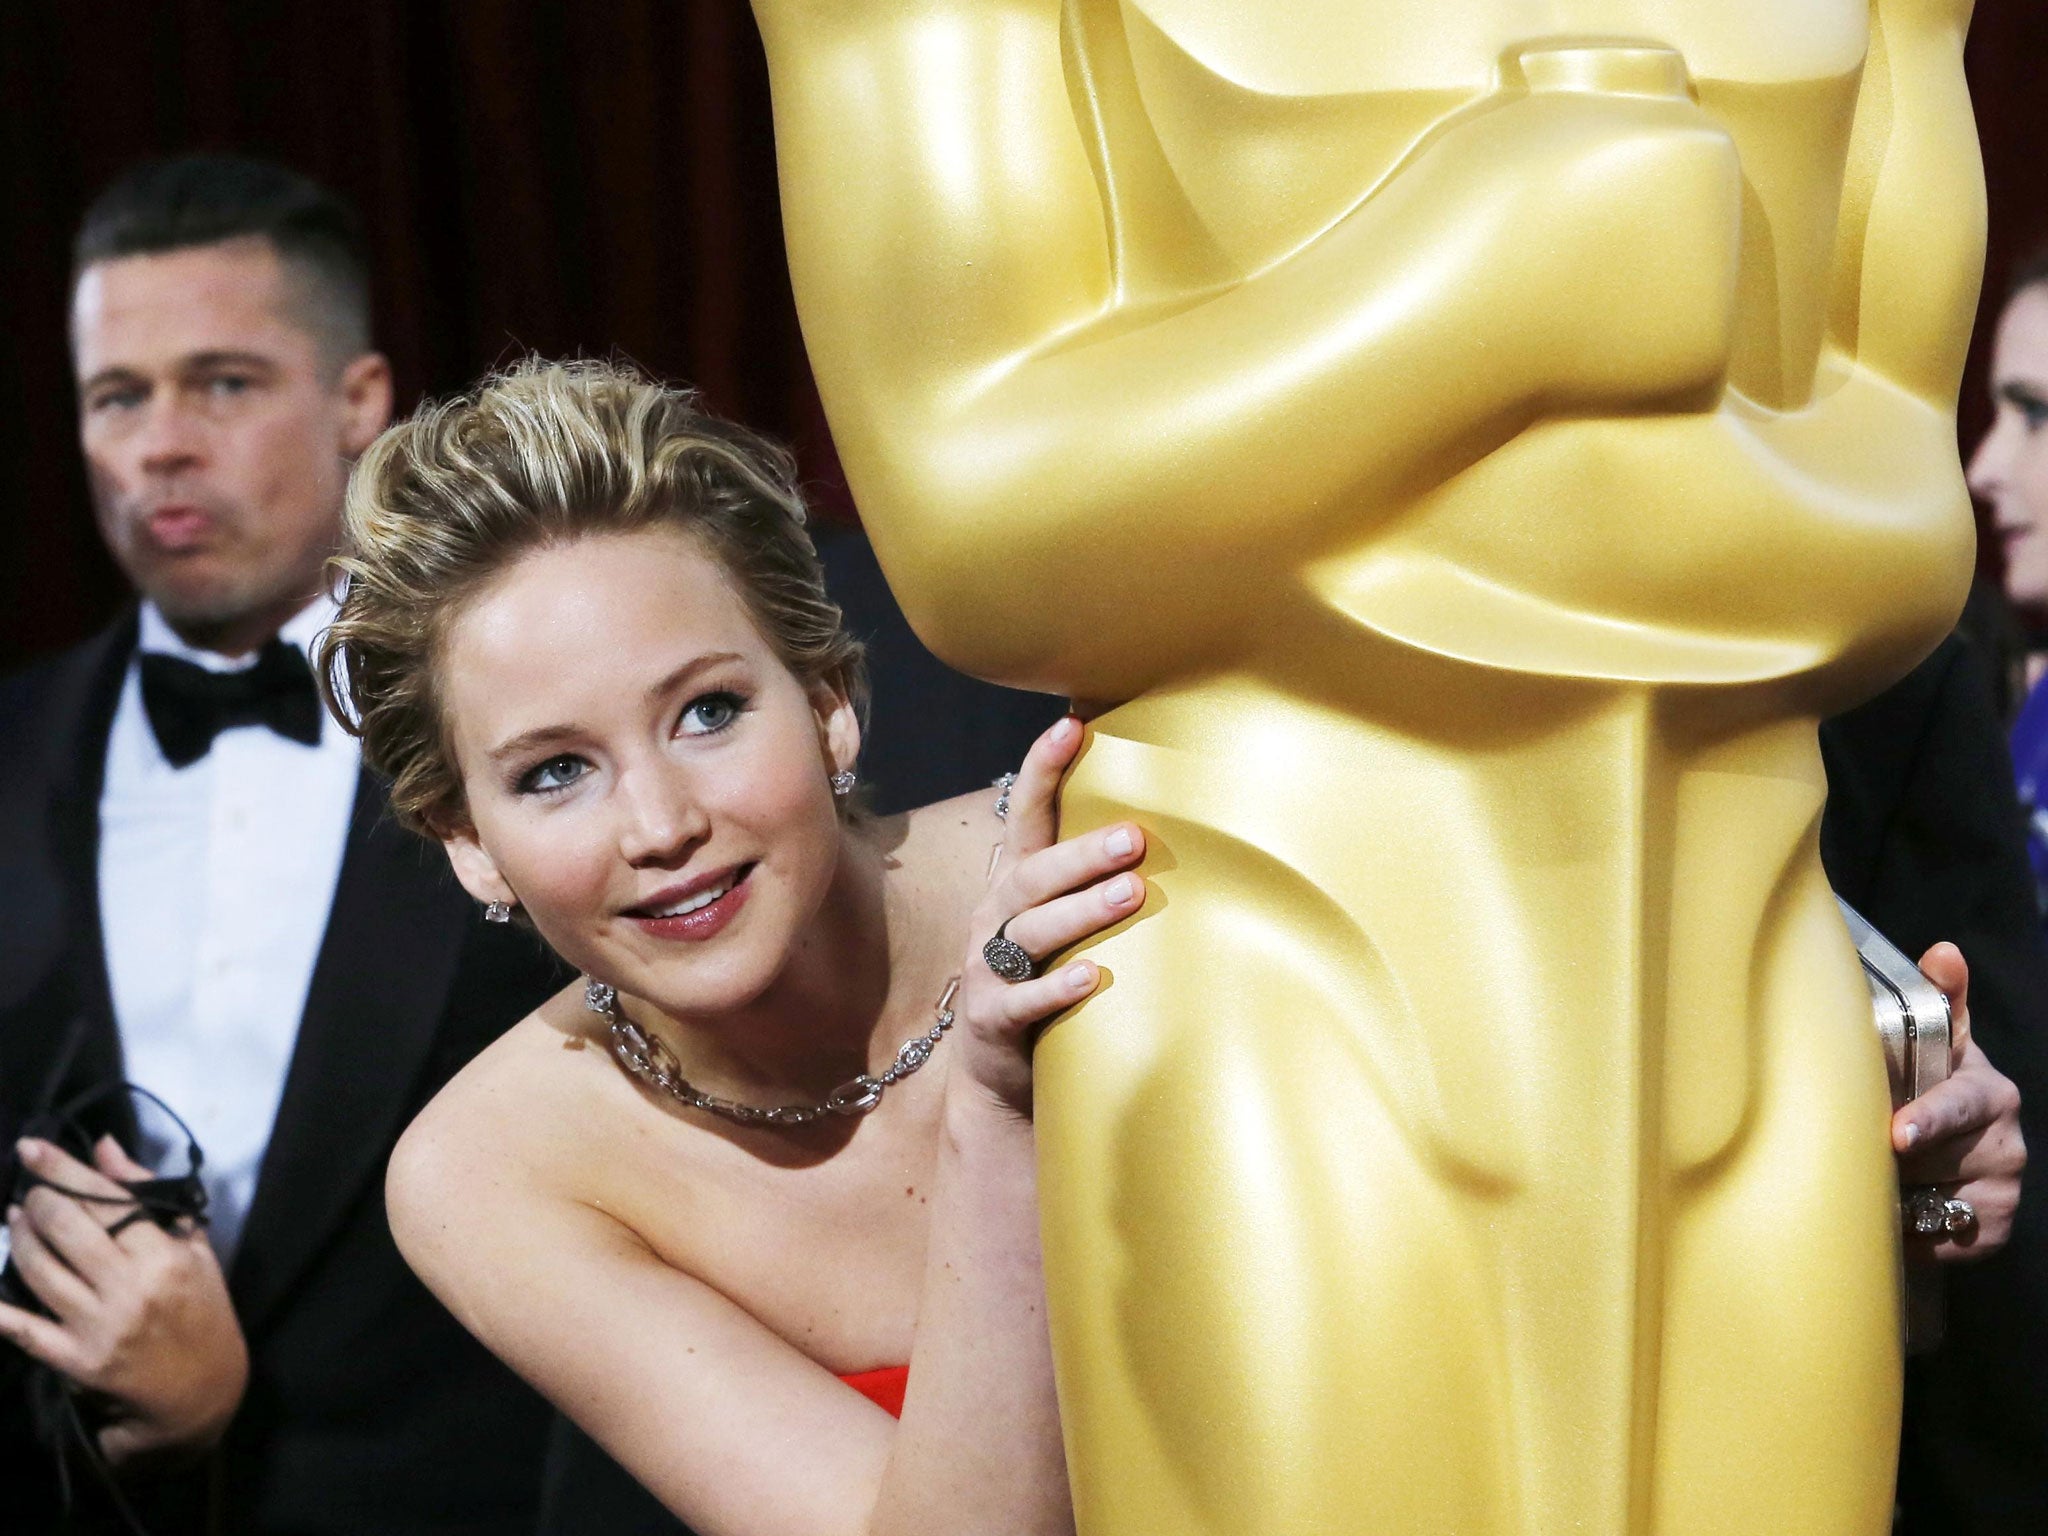 Jennifer Lawrence, best supporting actress nominee for her role in the film 'American Hustle', peeks around an Oscar statue on the red carpet as actor Brad Pitt (L) looks on at the 86th Academy Awards in Hollywood